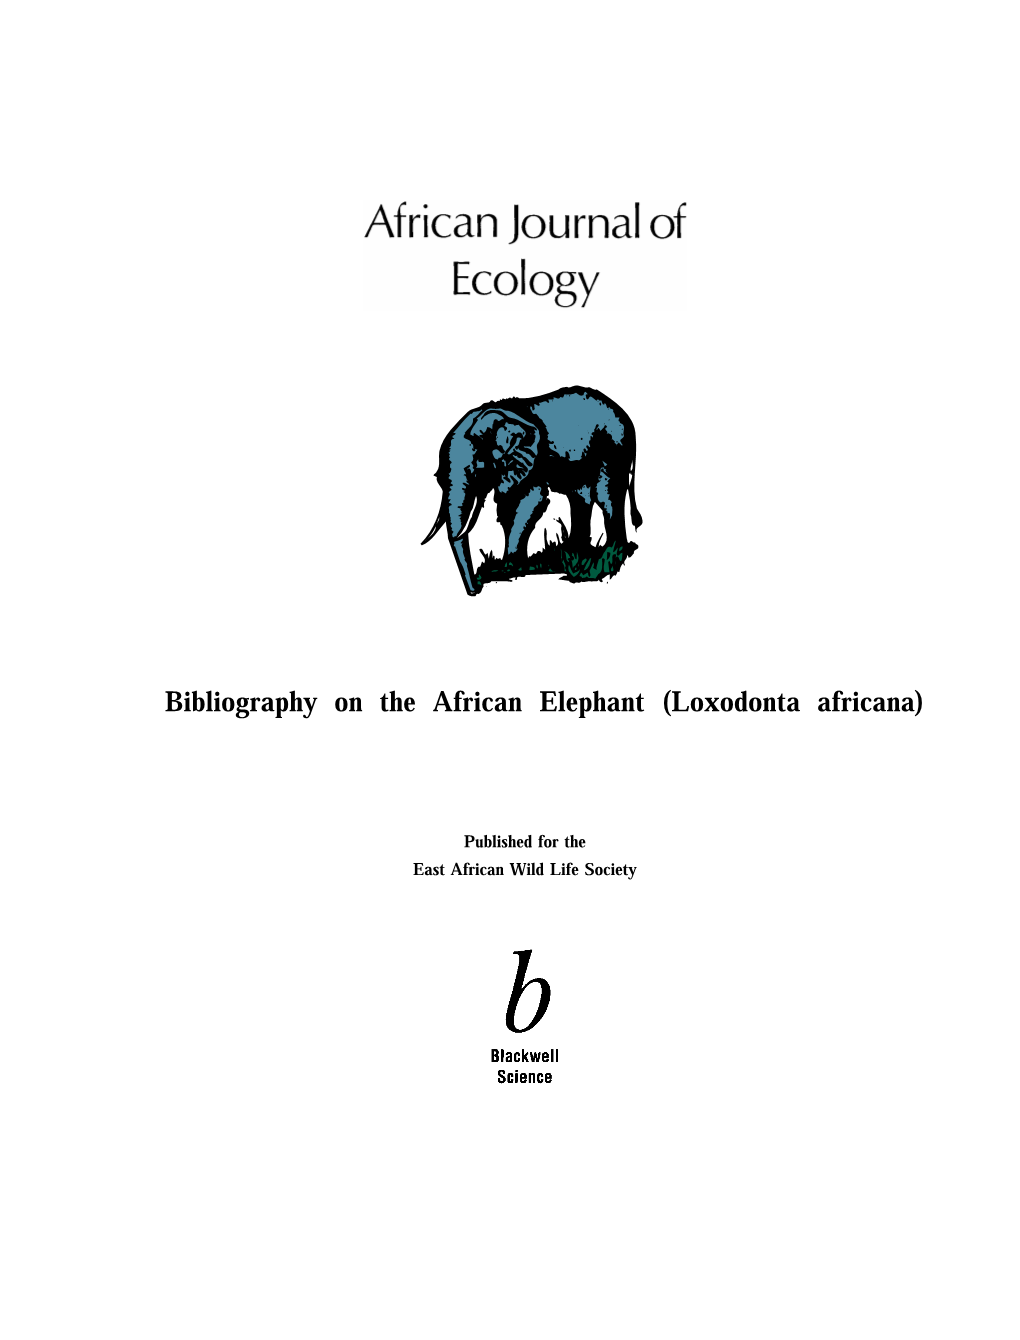 Bibliography on the African Elephant (Loxodonta Africana)